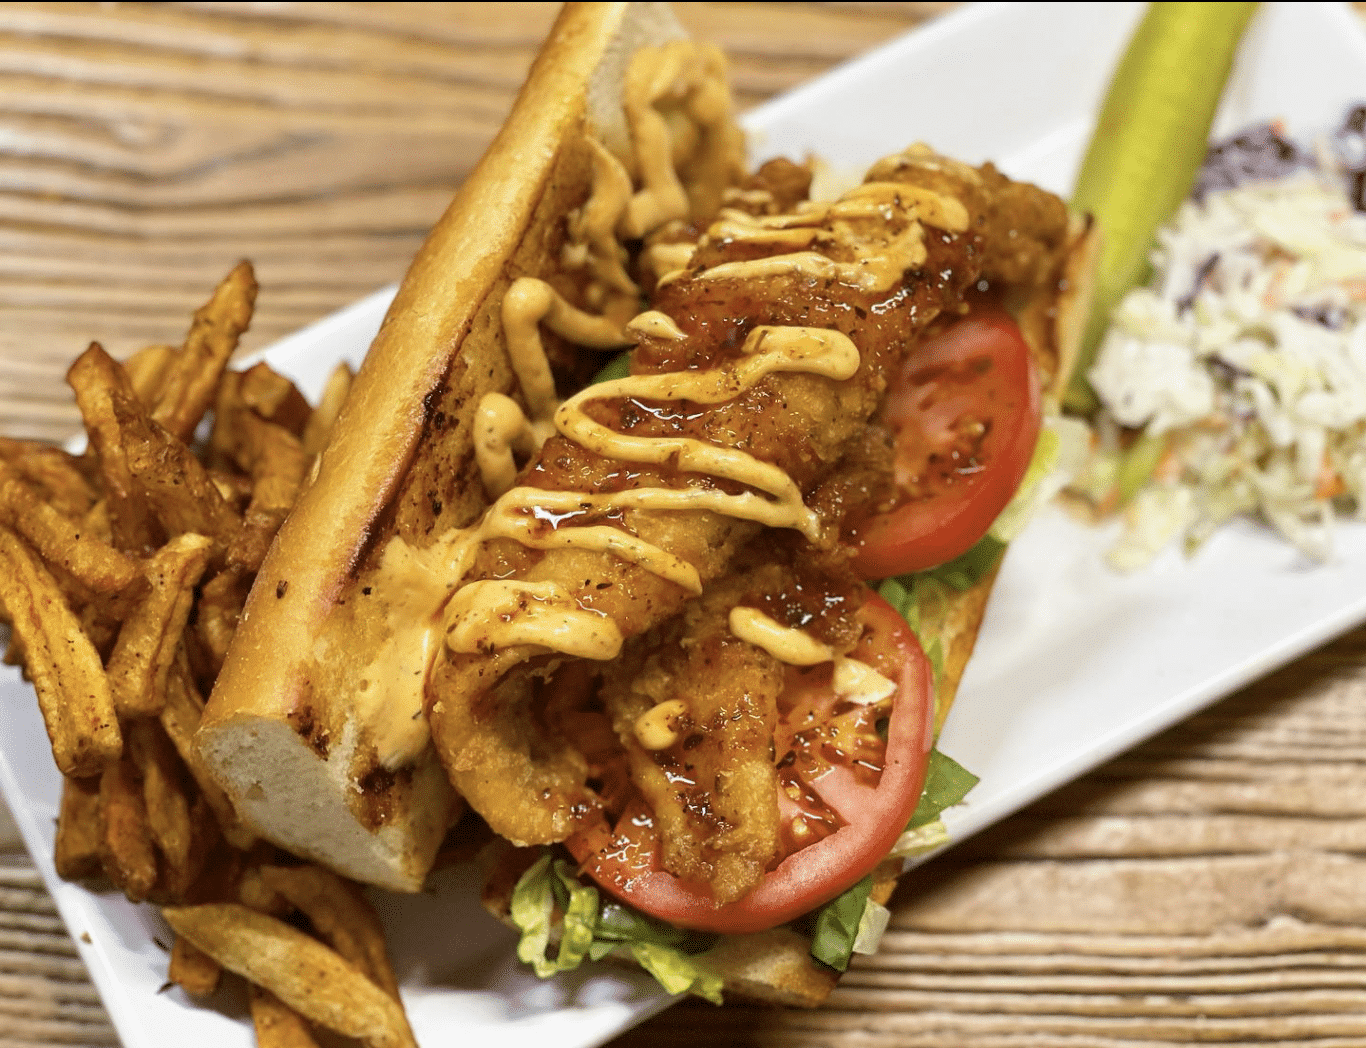 Fried seafood sandwich from Black Nile Restaurant in Brooklyn, NY